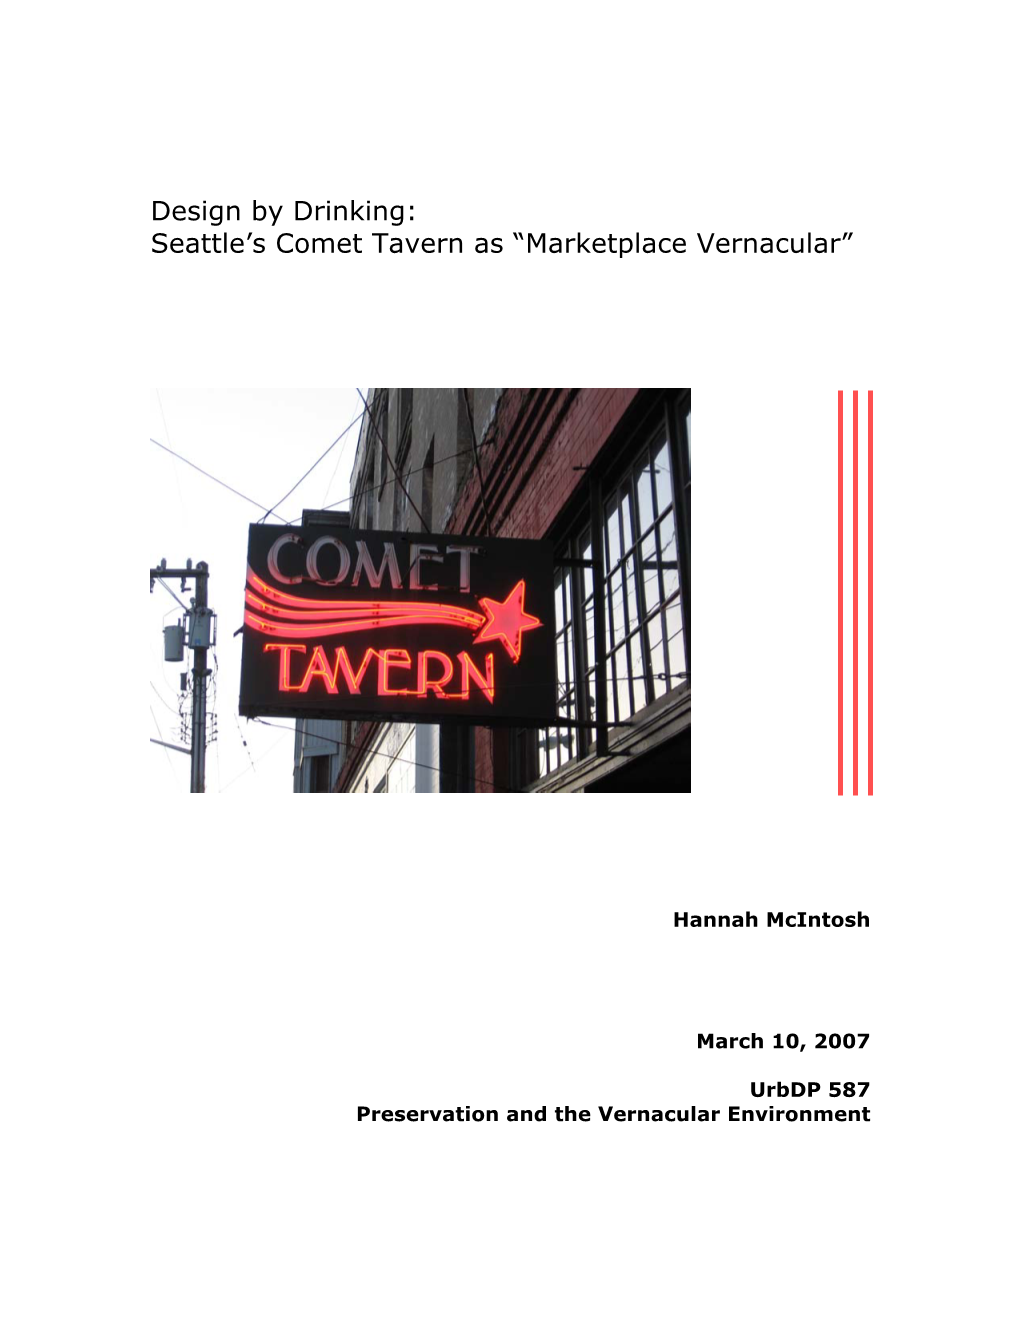 Design by Drinking: Seattle's Comet Tavern As “Marketplace Vernacular”